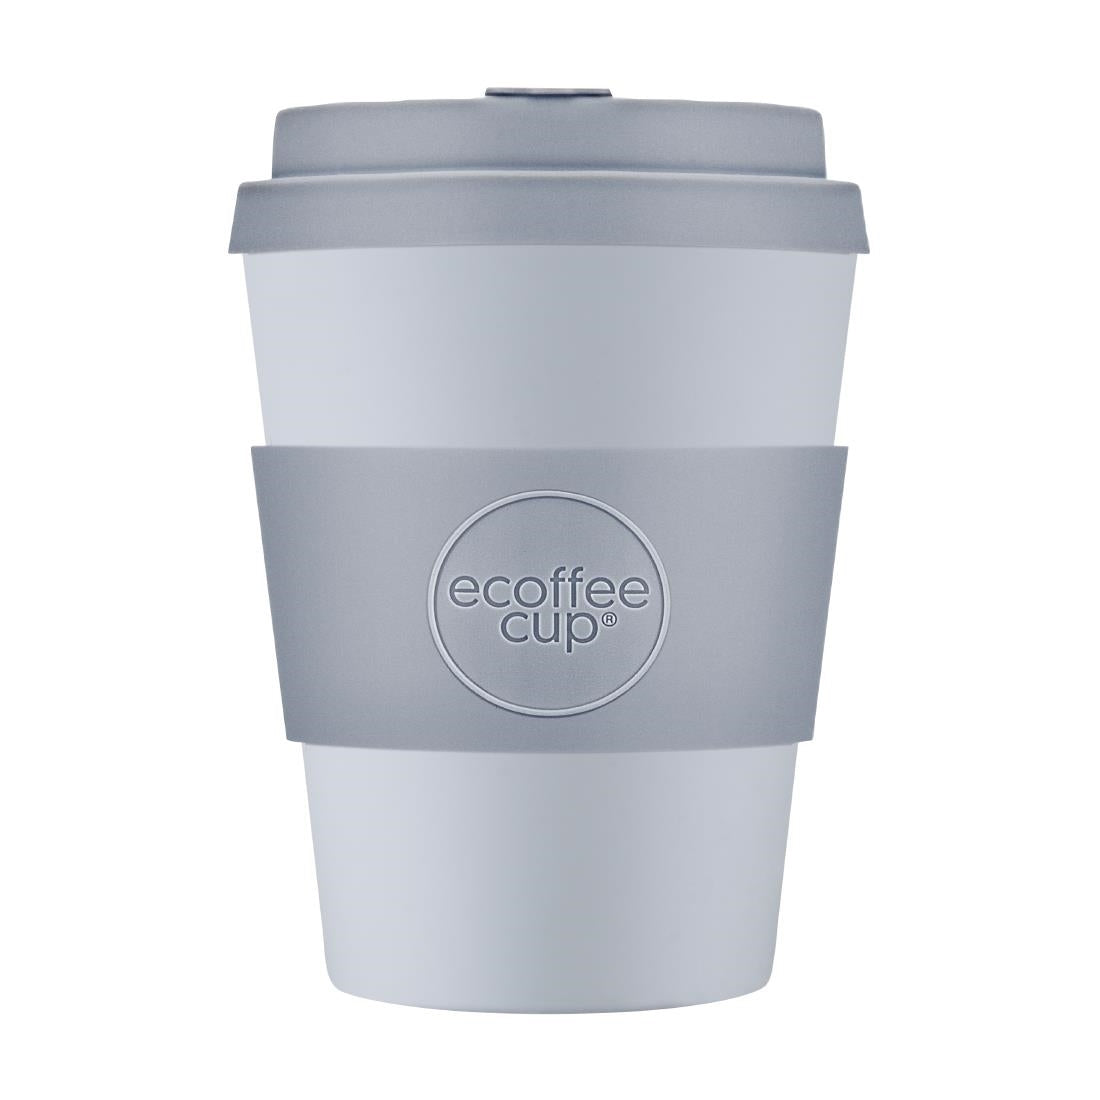 CU492 ecoffee cup Reusable Coffee Cup Glittertind Design 12oz JD Catering Equipment Solutions Ltd